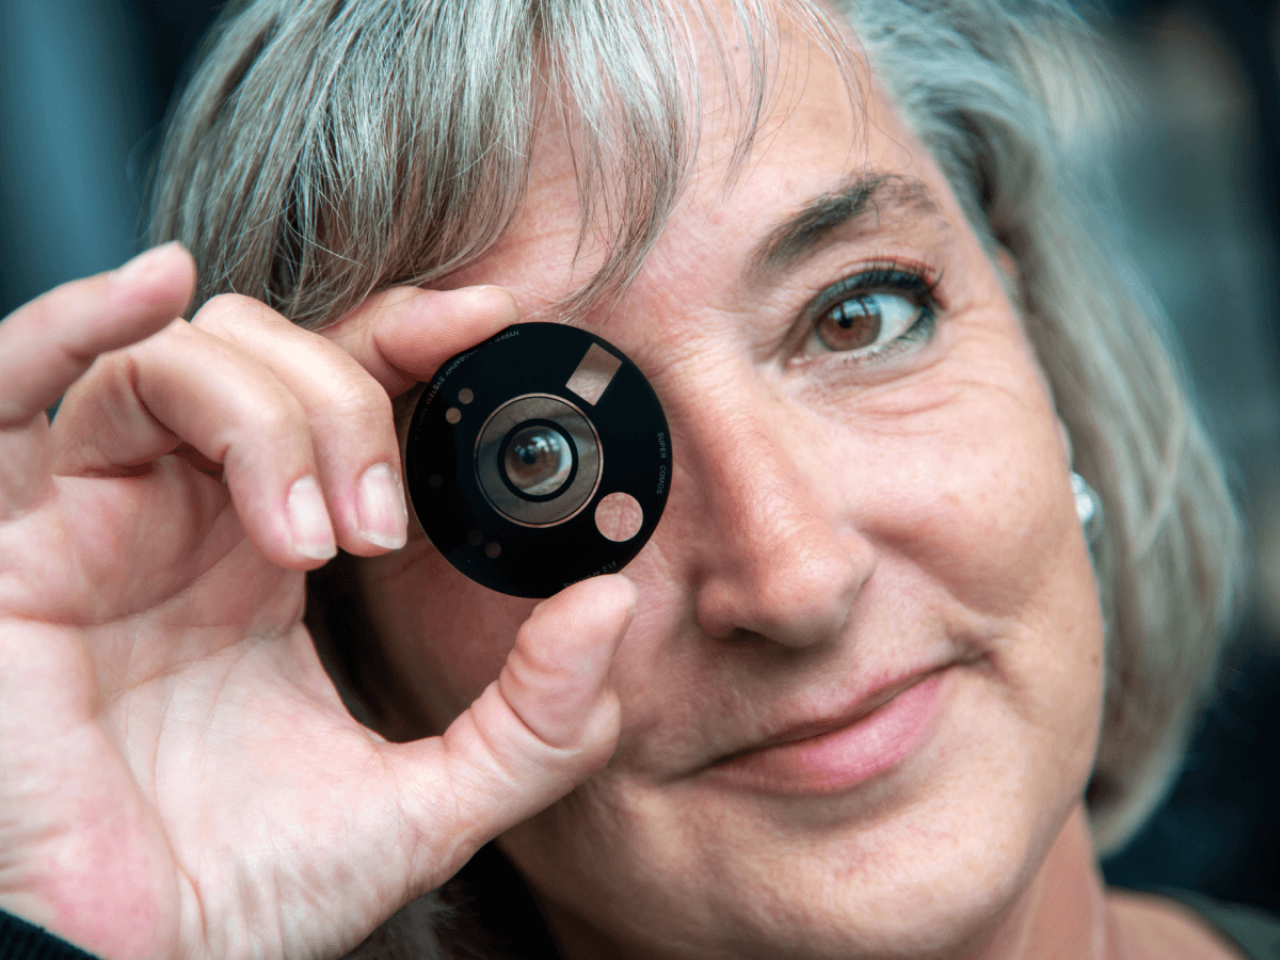 Corning program specialist Loretta Moses holds a Corning® Gorilla® Glass with DX/DX+ mobile device camera lens cover.